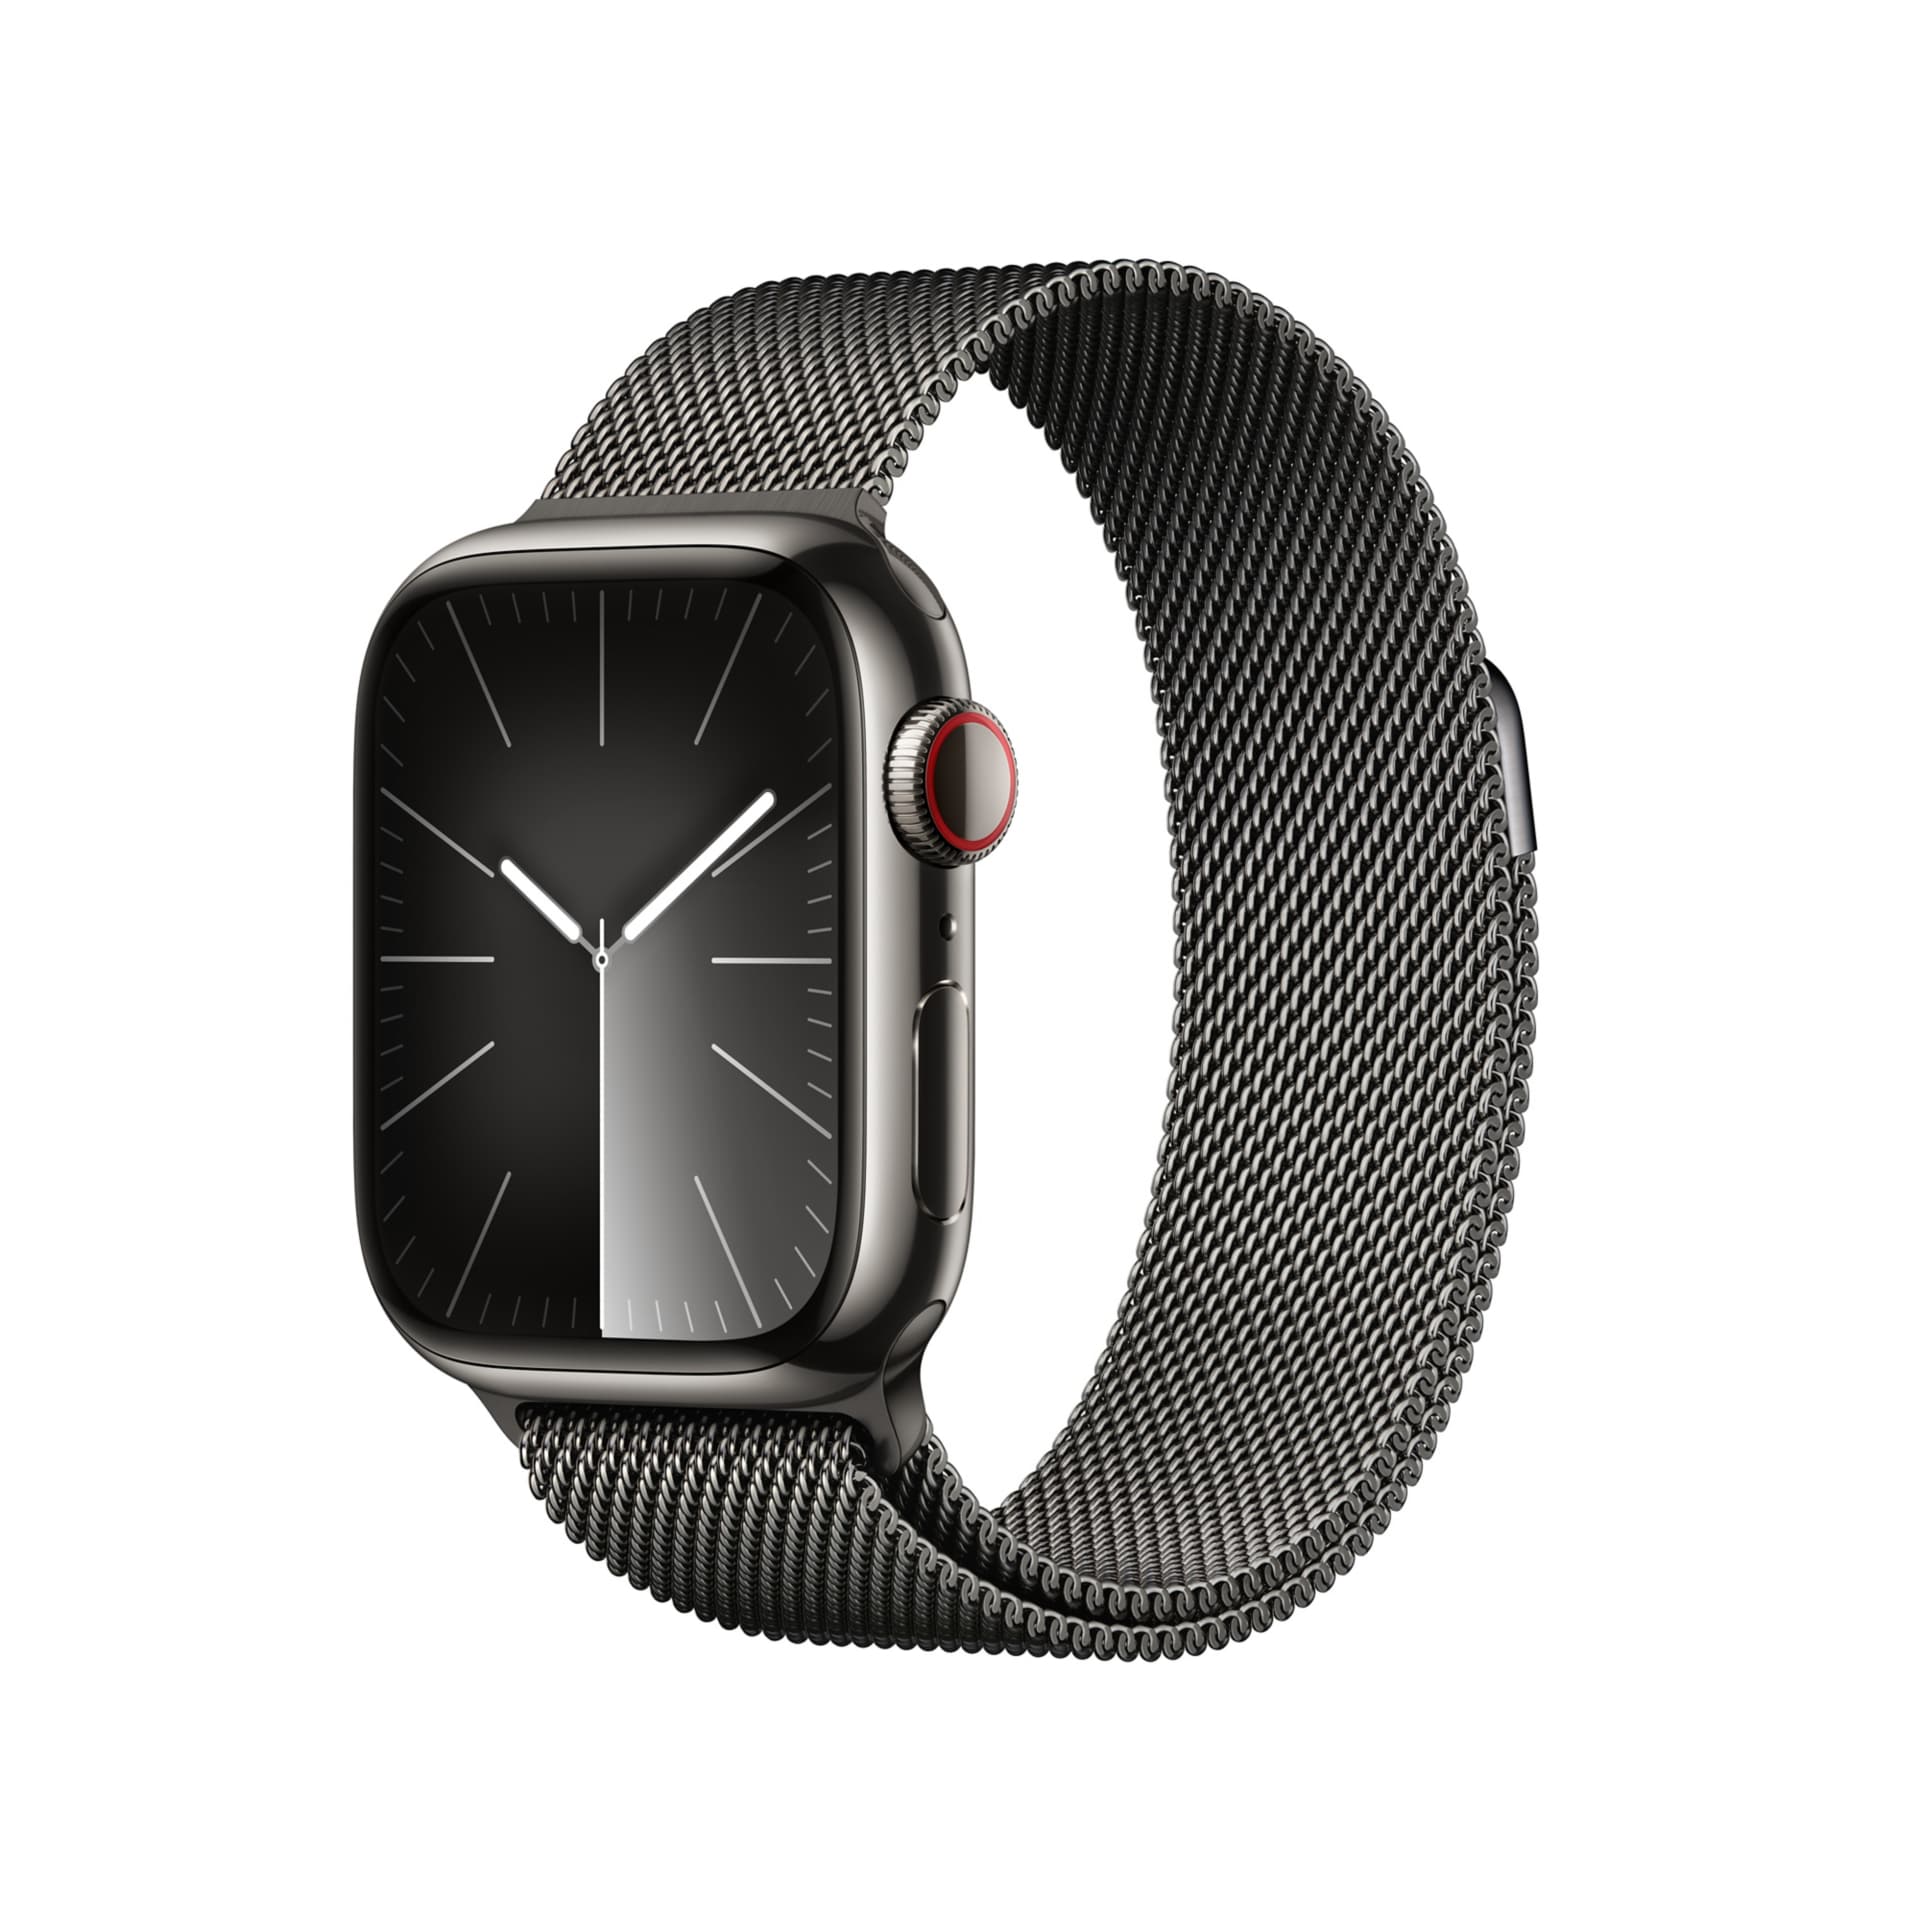 Apple Watch Series 9 (GPS + Cellular) - 41mm Graphite Stainless Steel Case with Graphite Milanese Loop - 64 GB